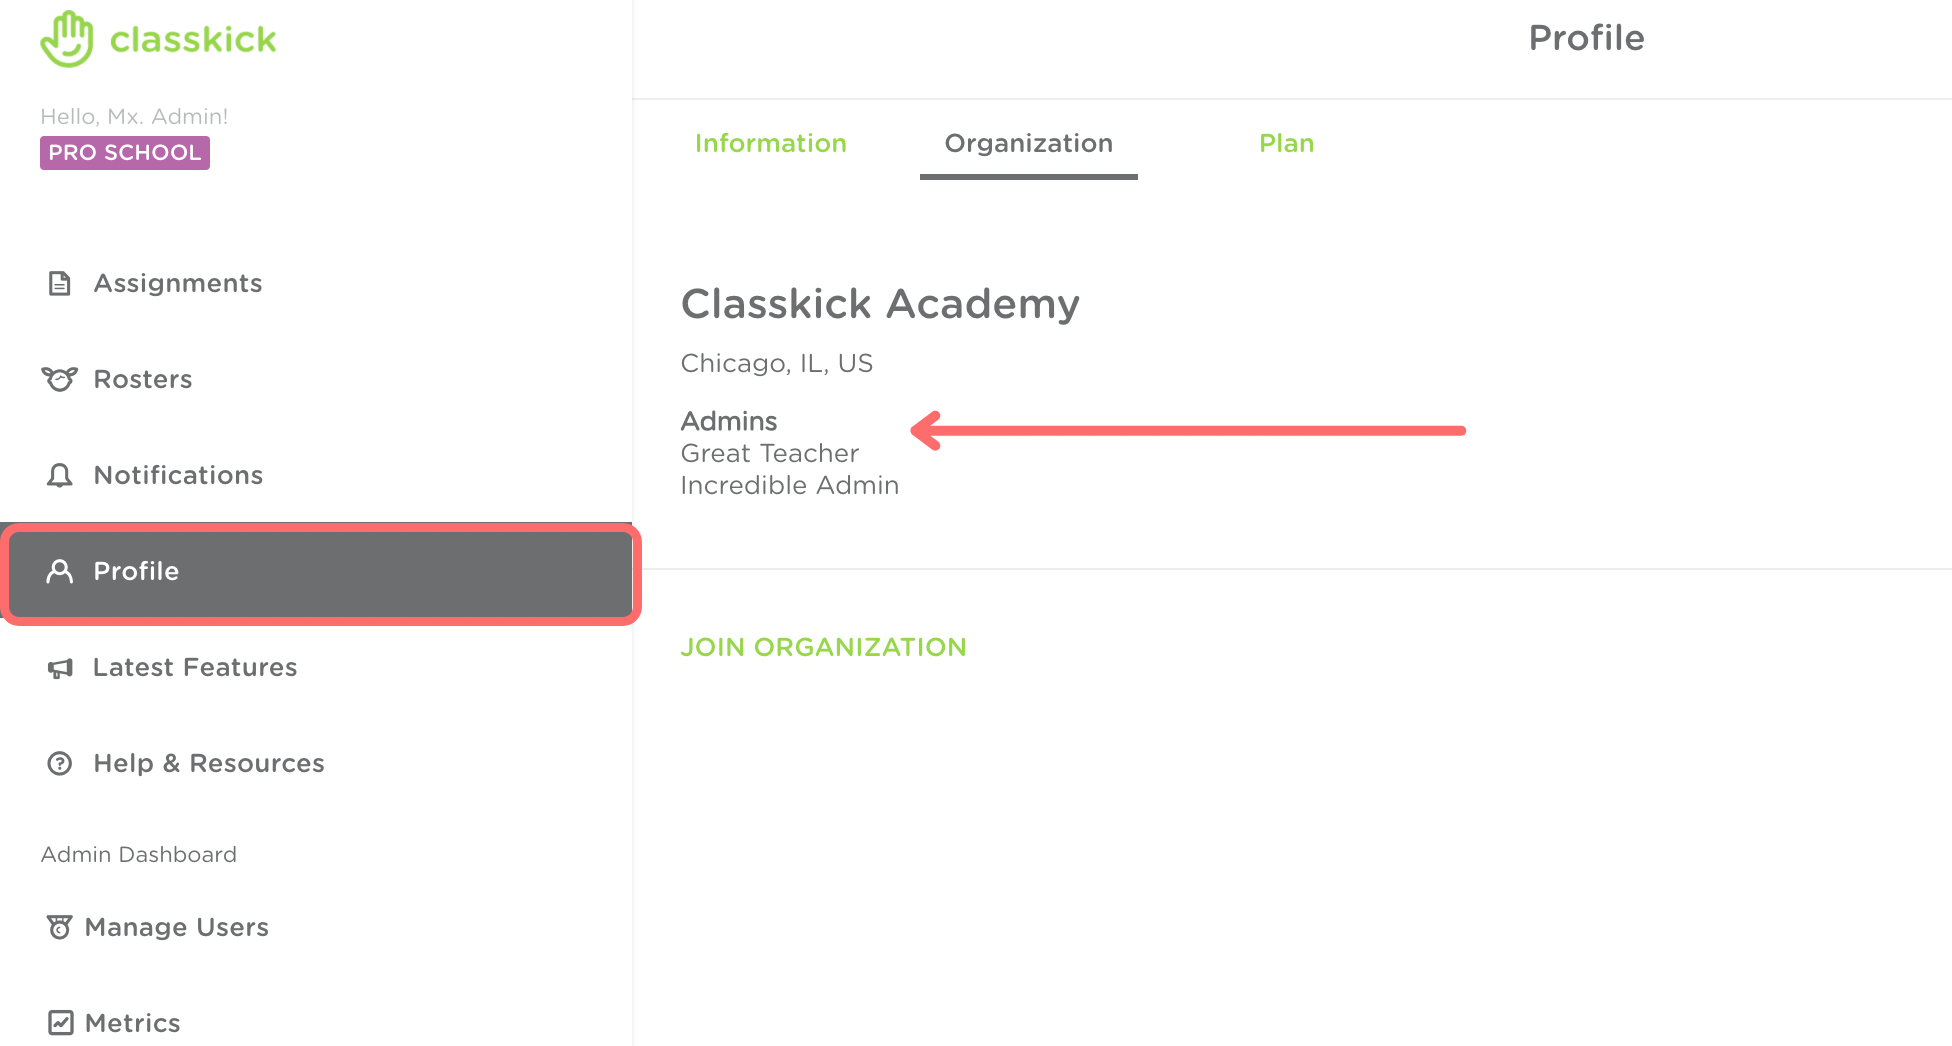 The Profile tab is highlighted in gray and outlined in red on the left hand side. A red arrow points to the admins, which are listed under organization.